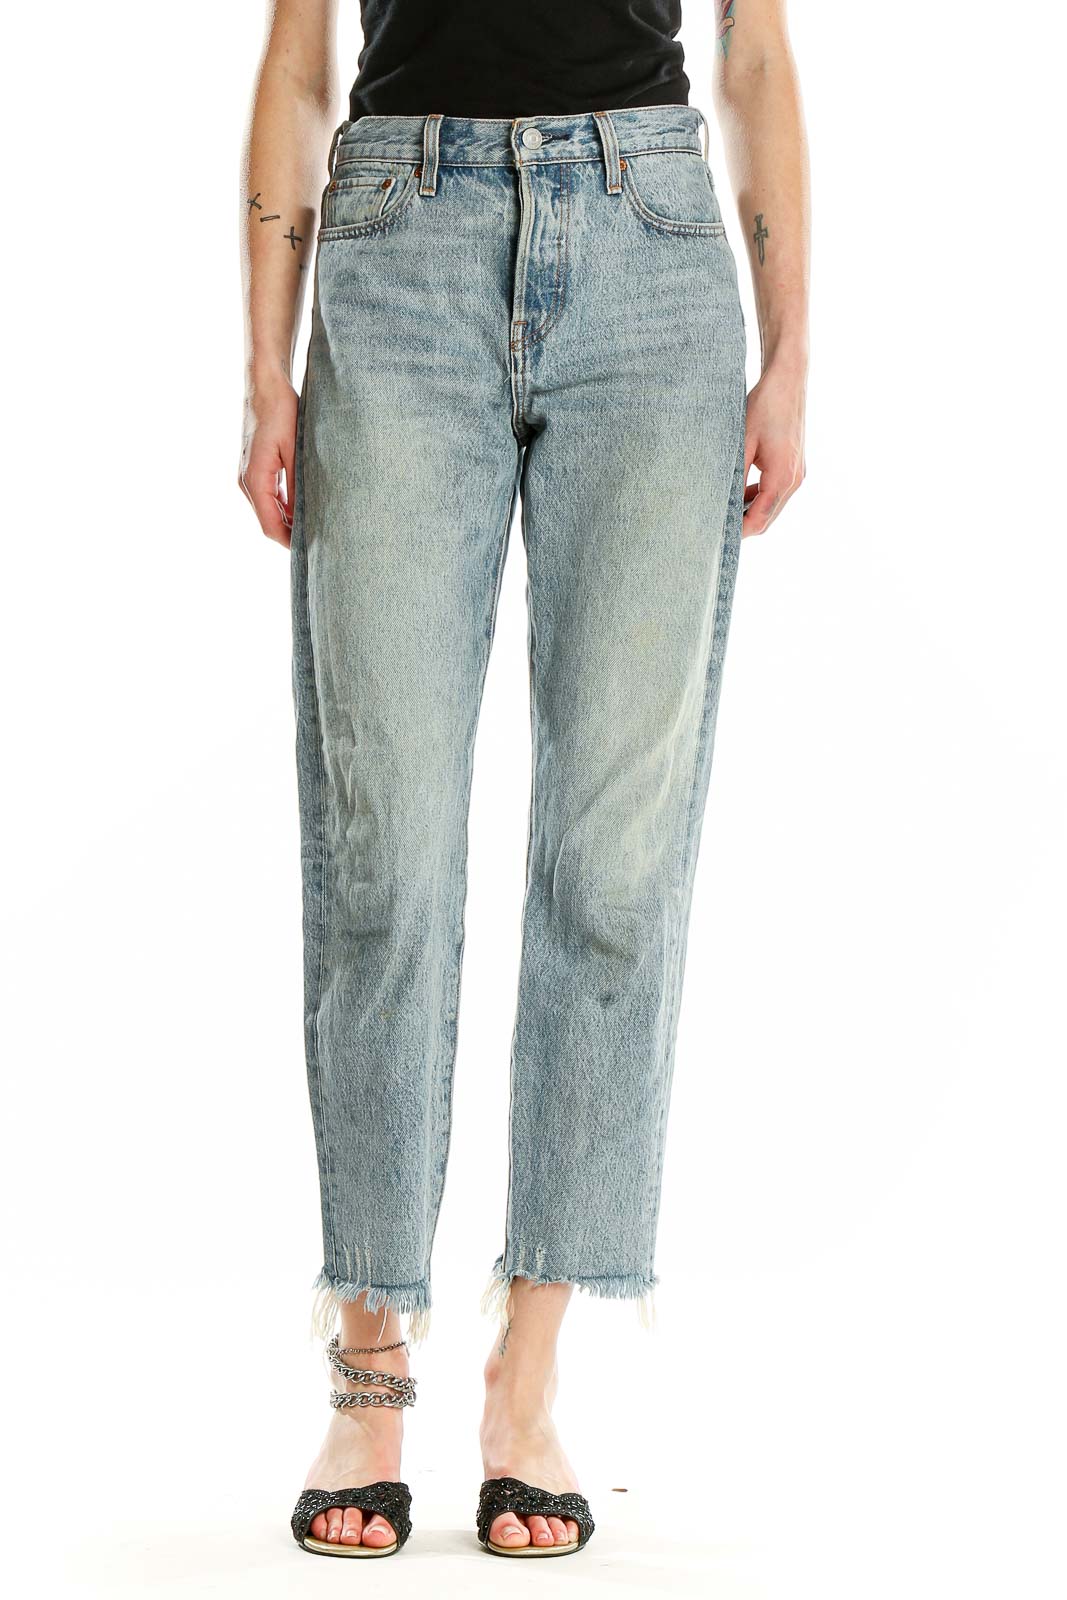 Grey Light Rinse Straight Leg Faded Jeans Front